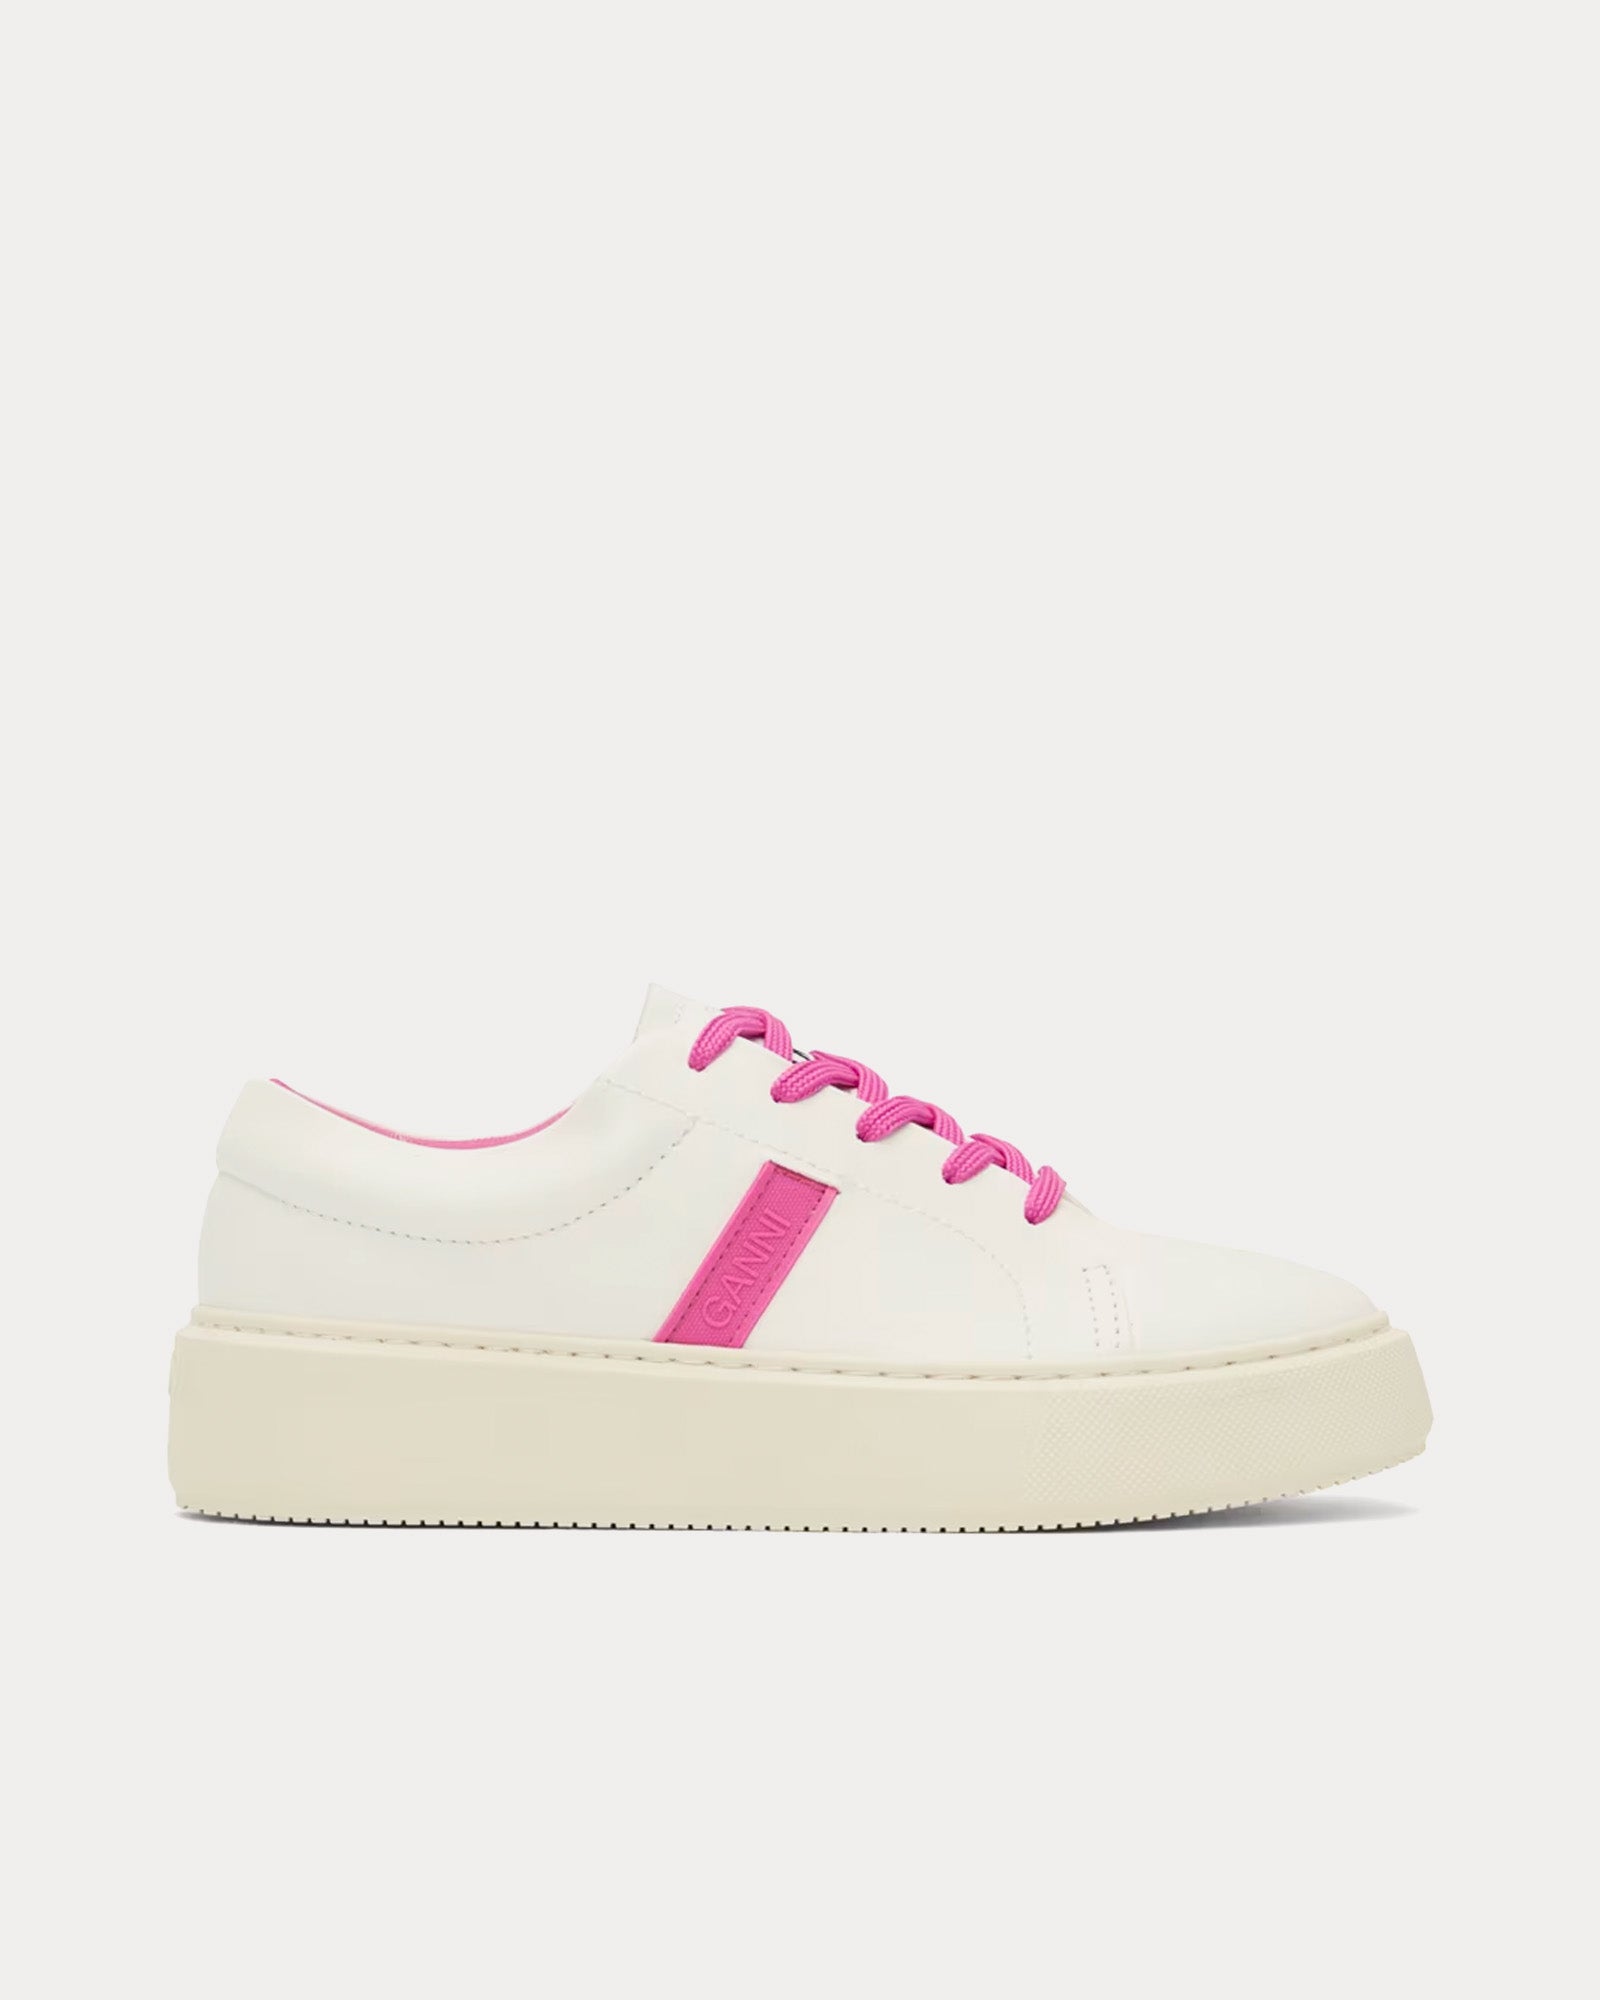 Ganni - Sporty Mix Cupsole White / Shocking Pink Low Top Sneakers